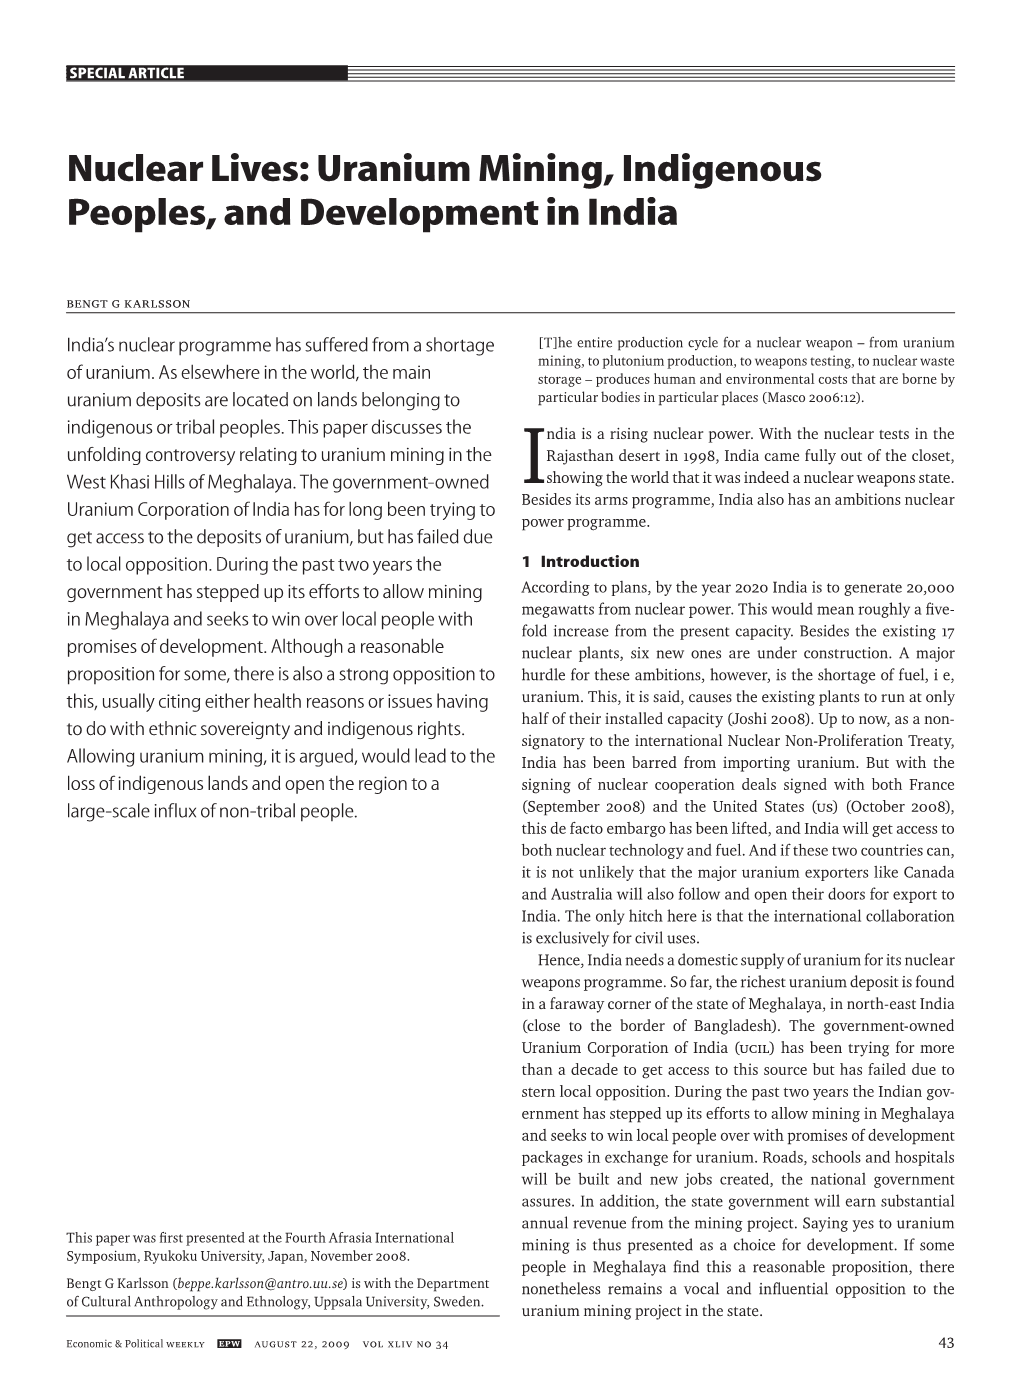 Nuclear Lives: Uranium Mining, Indigenous Peoples, and Development in India